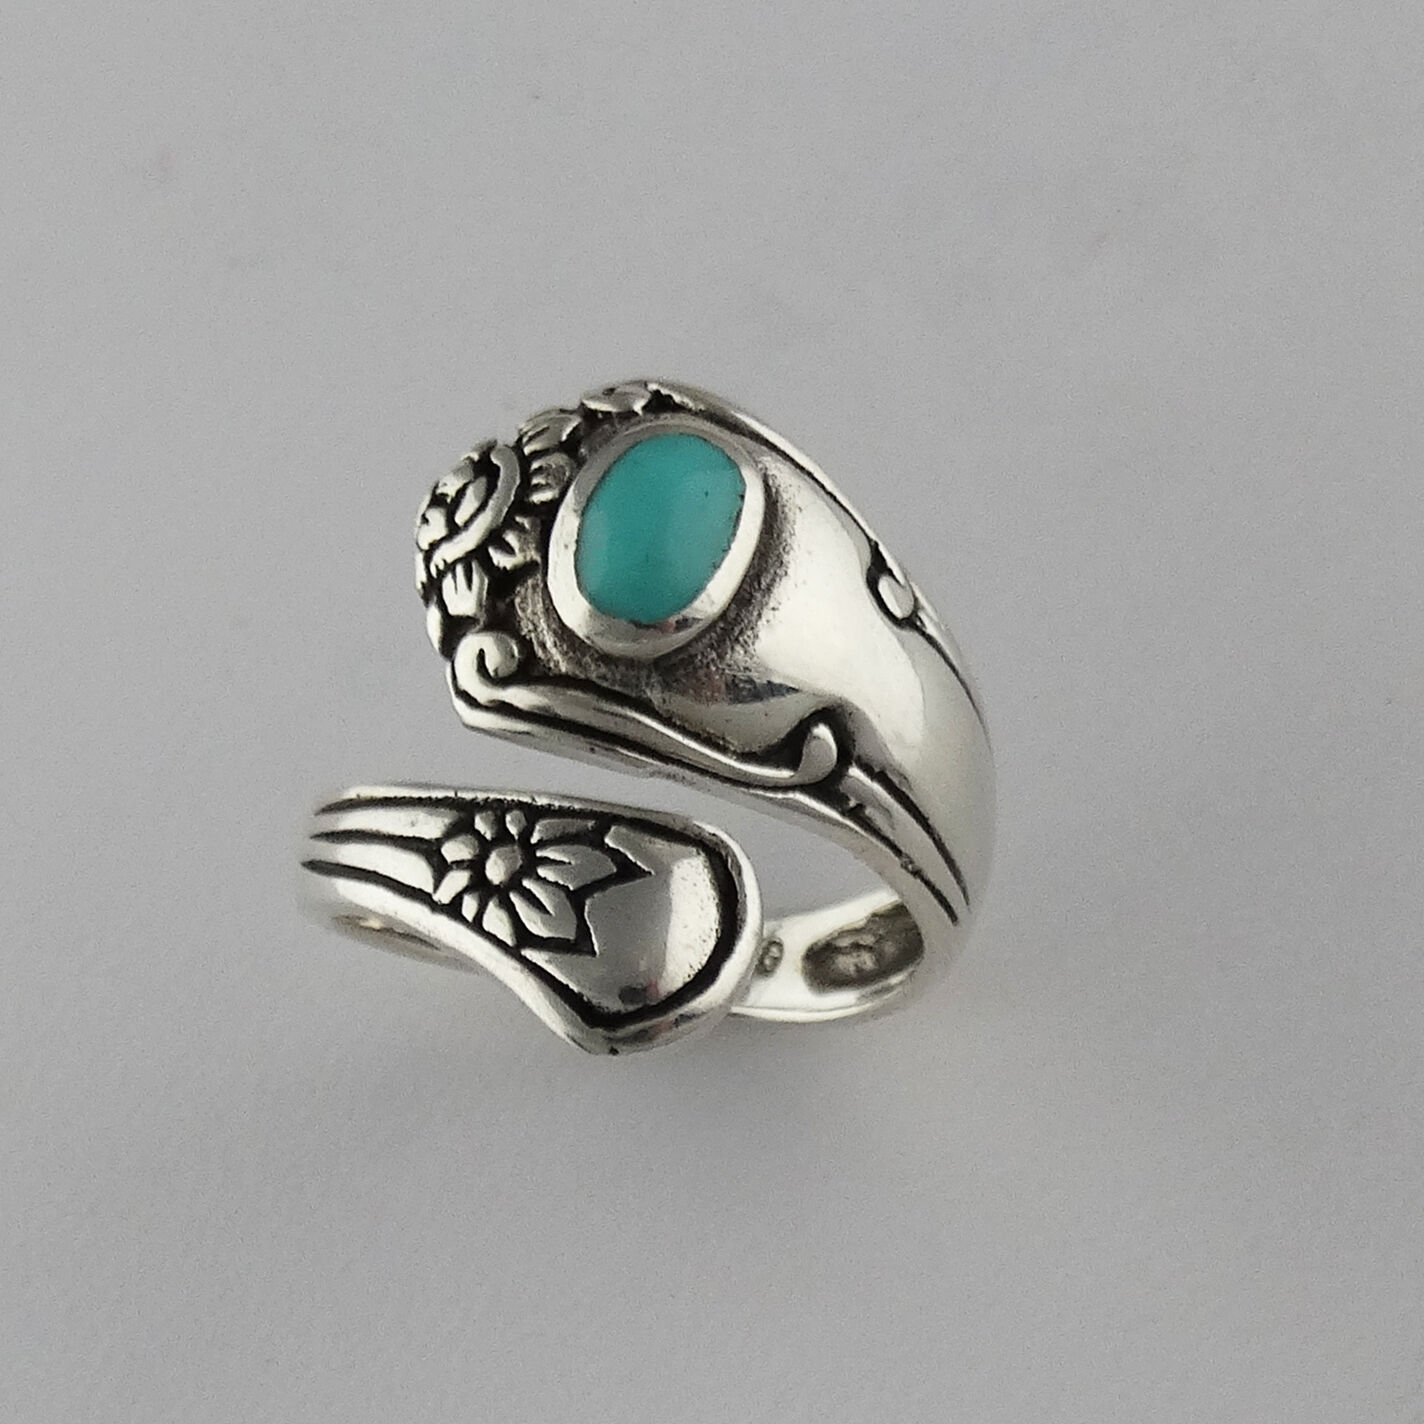 Flower Spoon Ring - 925 Sterling Silver - Turquoise Adjustable Sizes 6-9 New